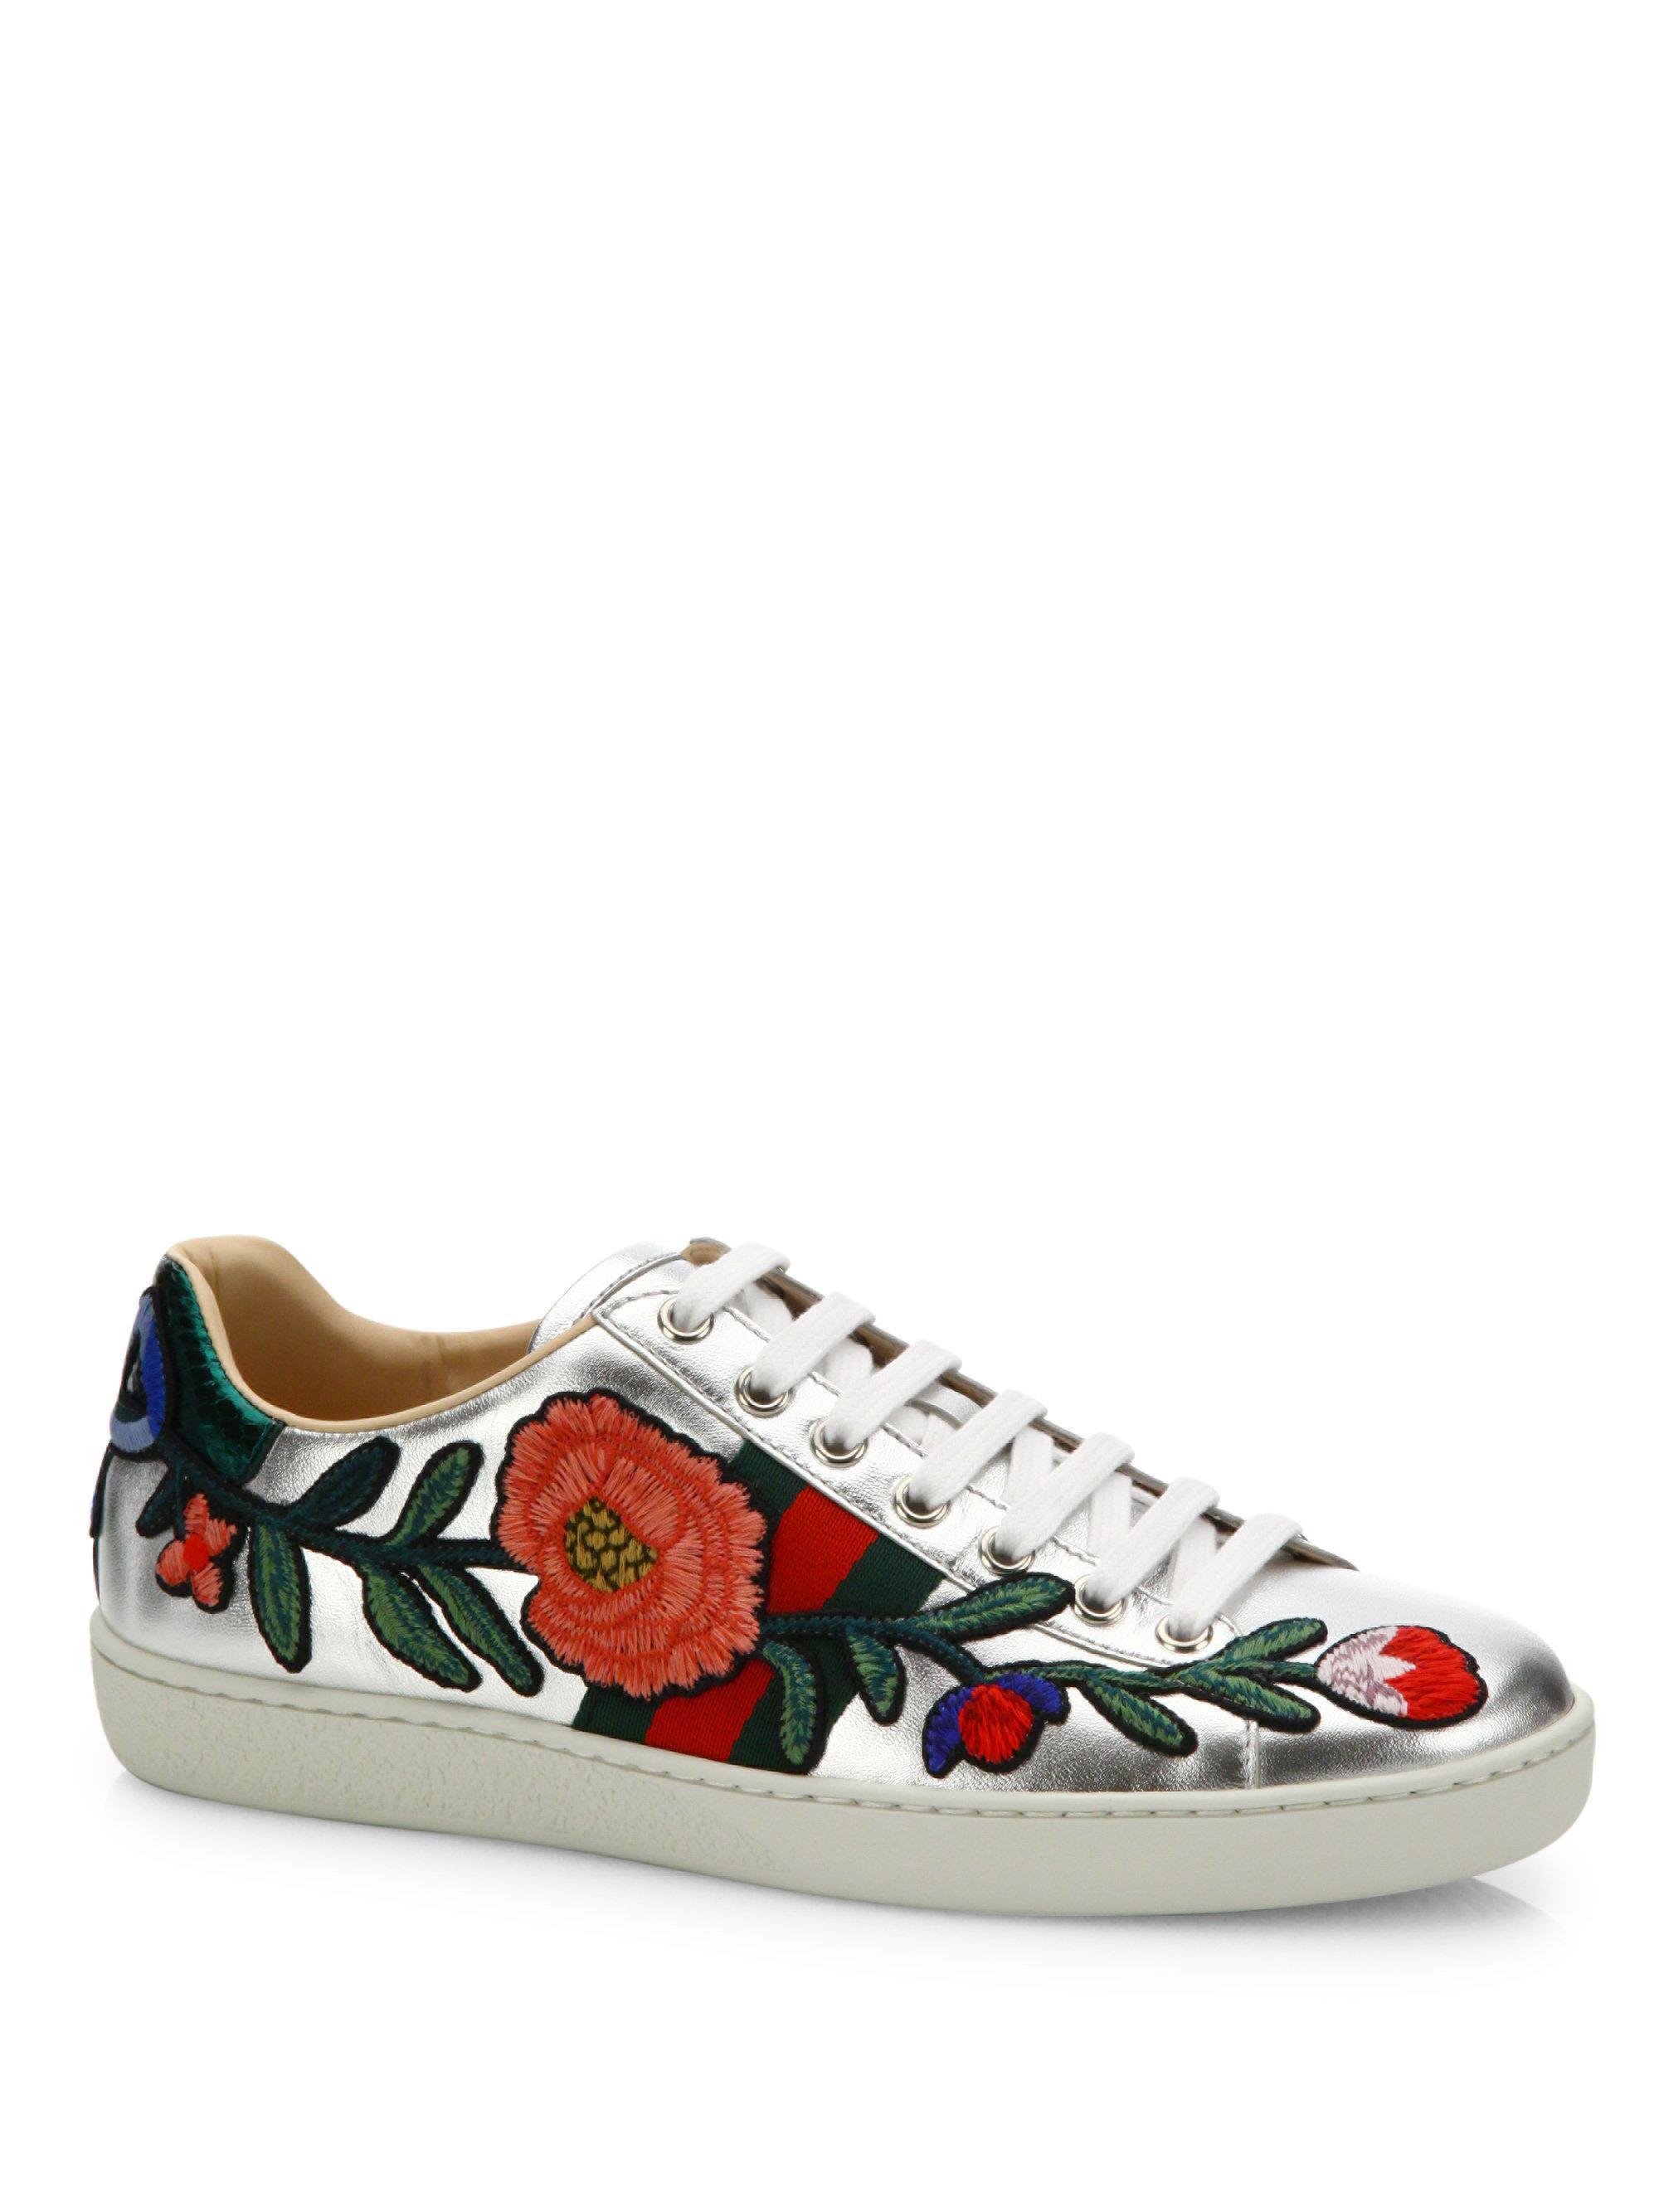 saks gucci shoes